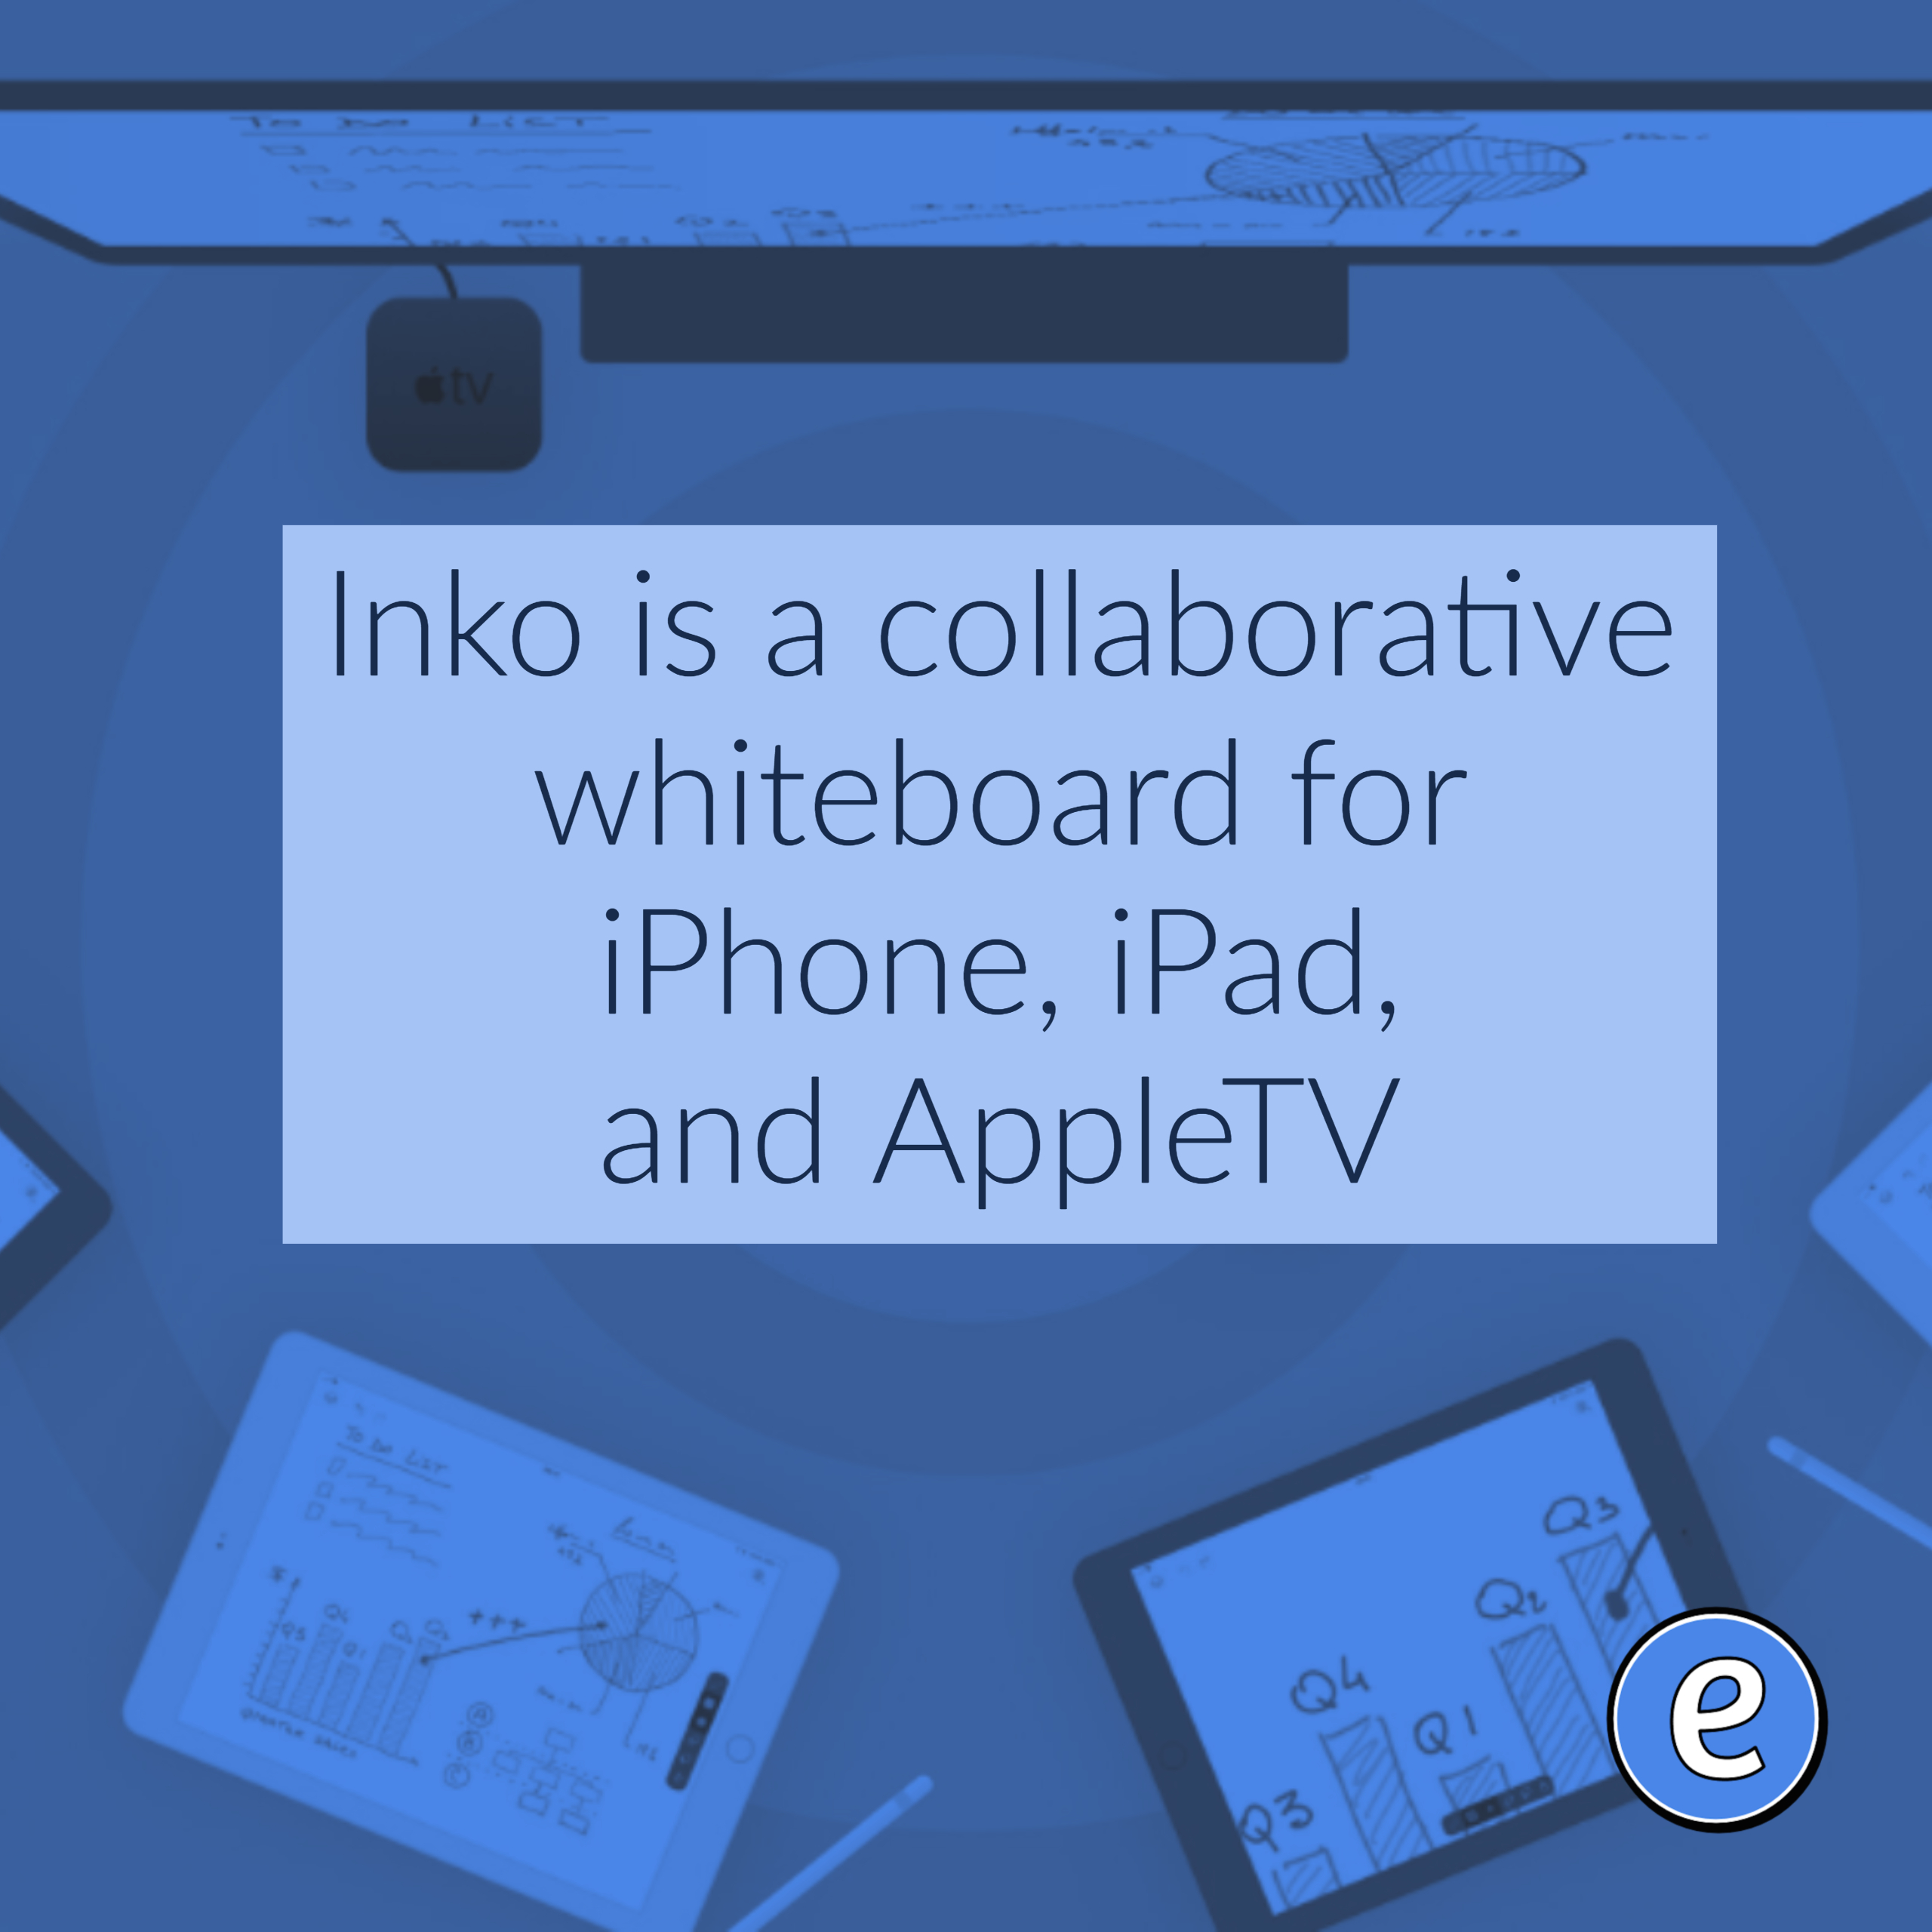 Inko is a collaborative whiteboard for iPhone, iPad, and AppleTV